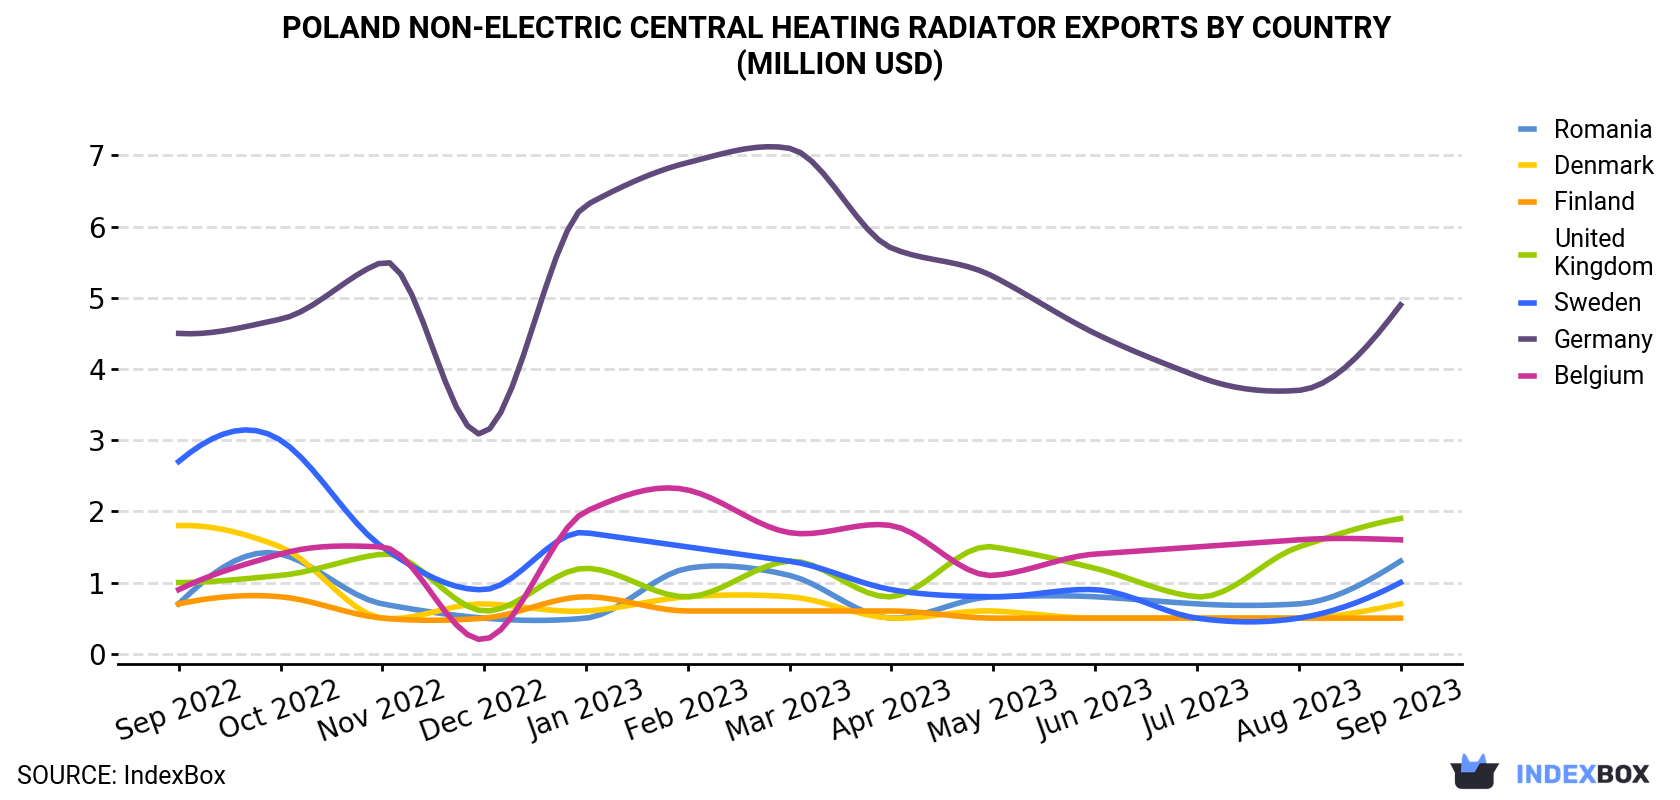 Poland Non-Electric Central Heating Radiator Exports By Country (Million USD)